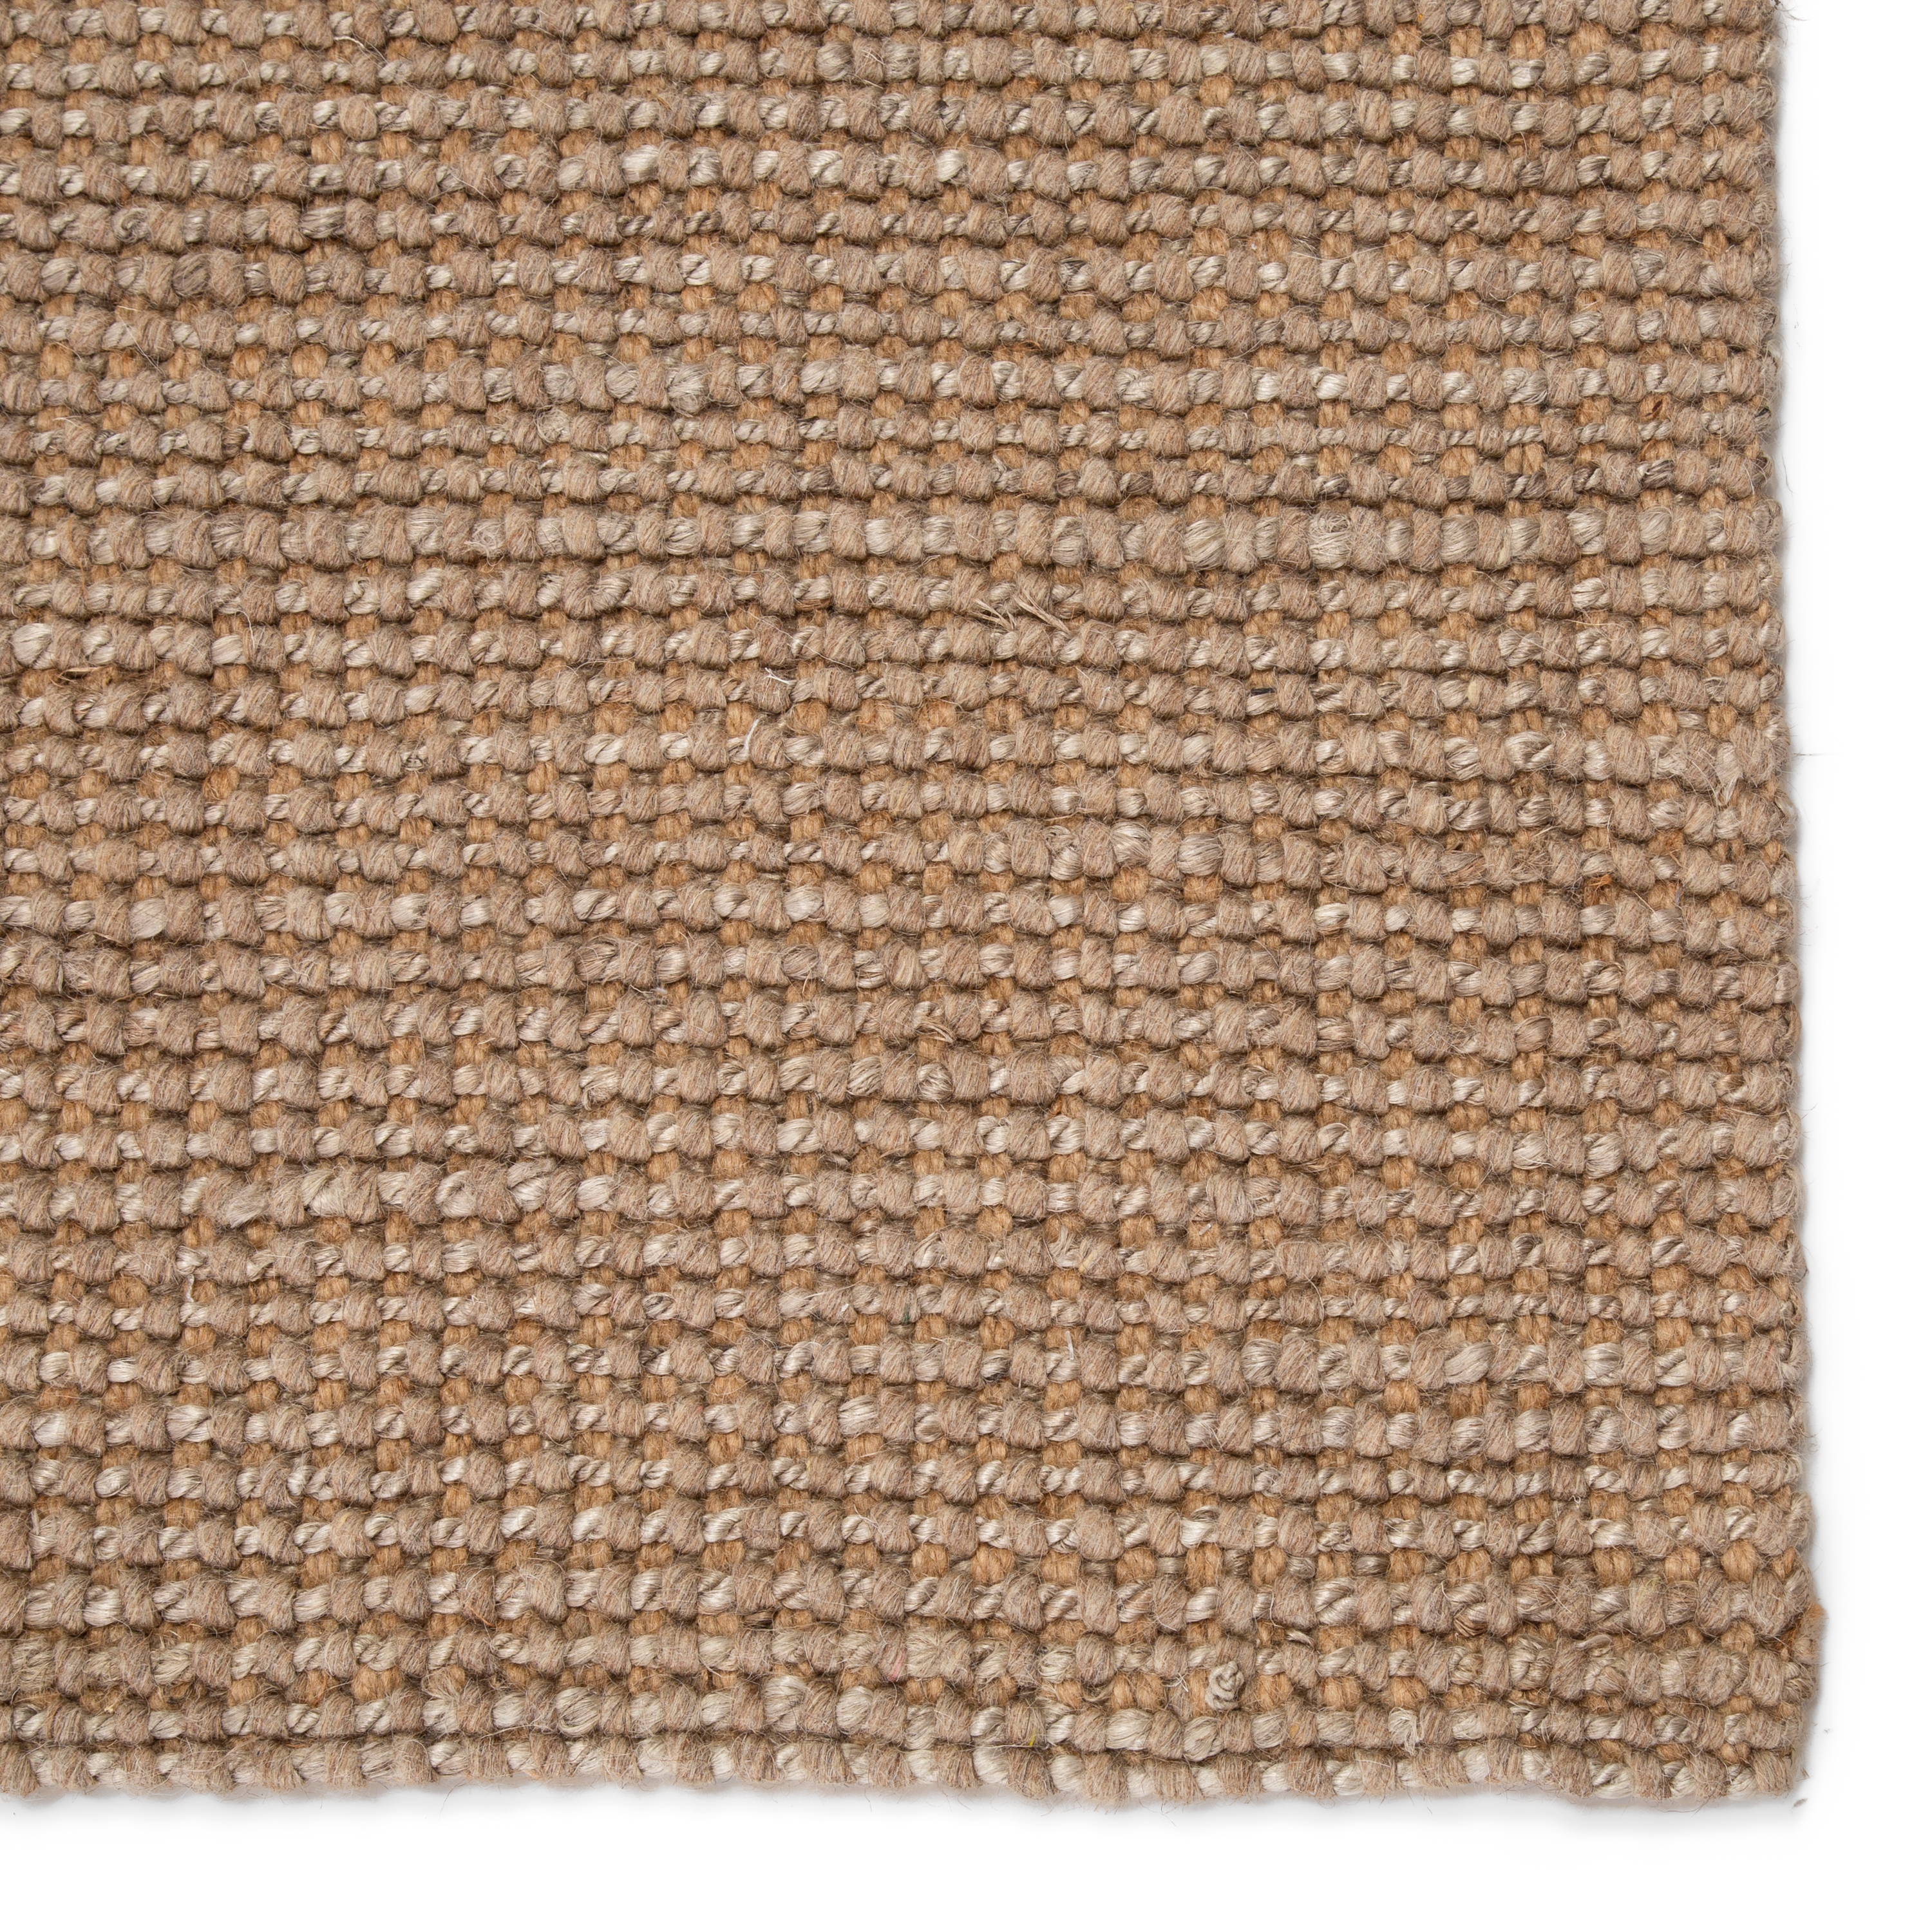 Beech Natural Solid Tan/ Taupe Area Rug (8'X10') - Image 3